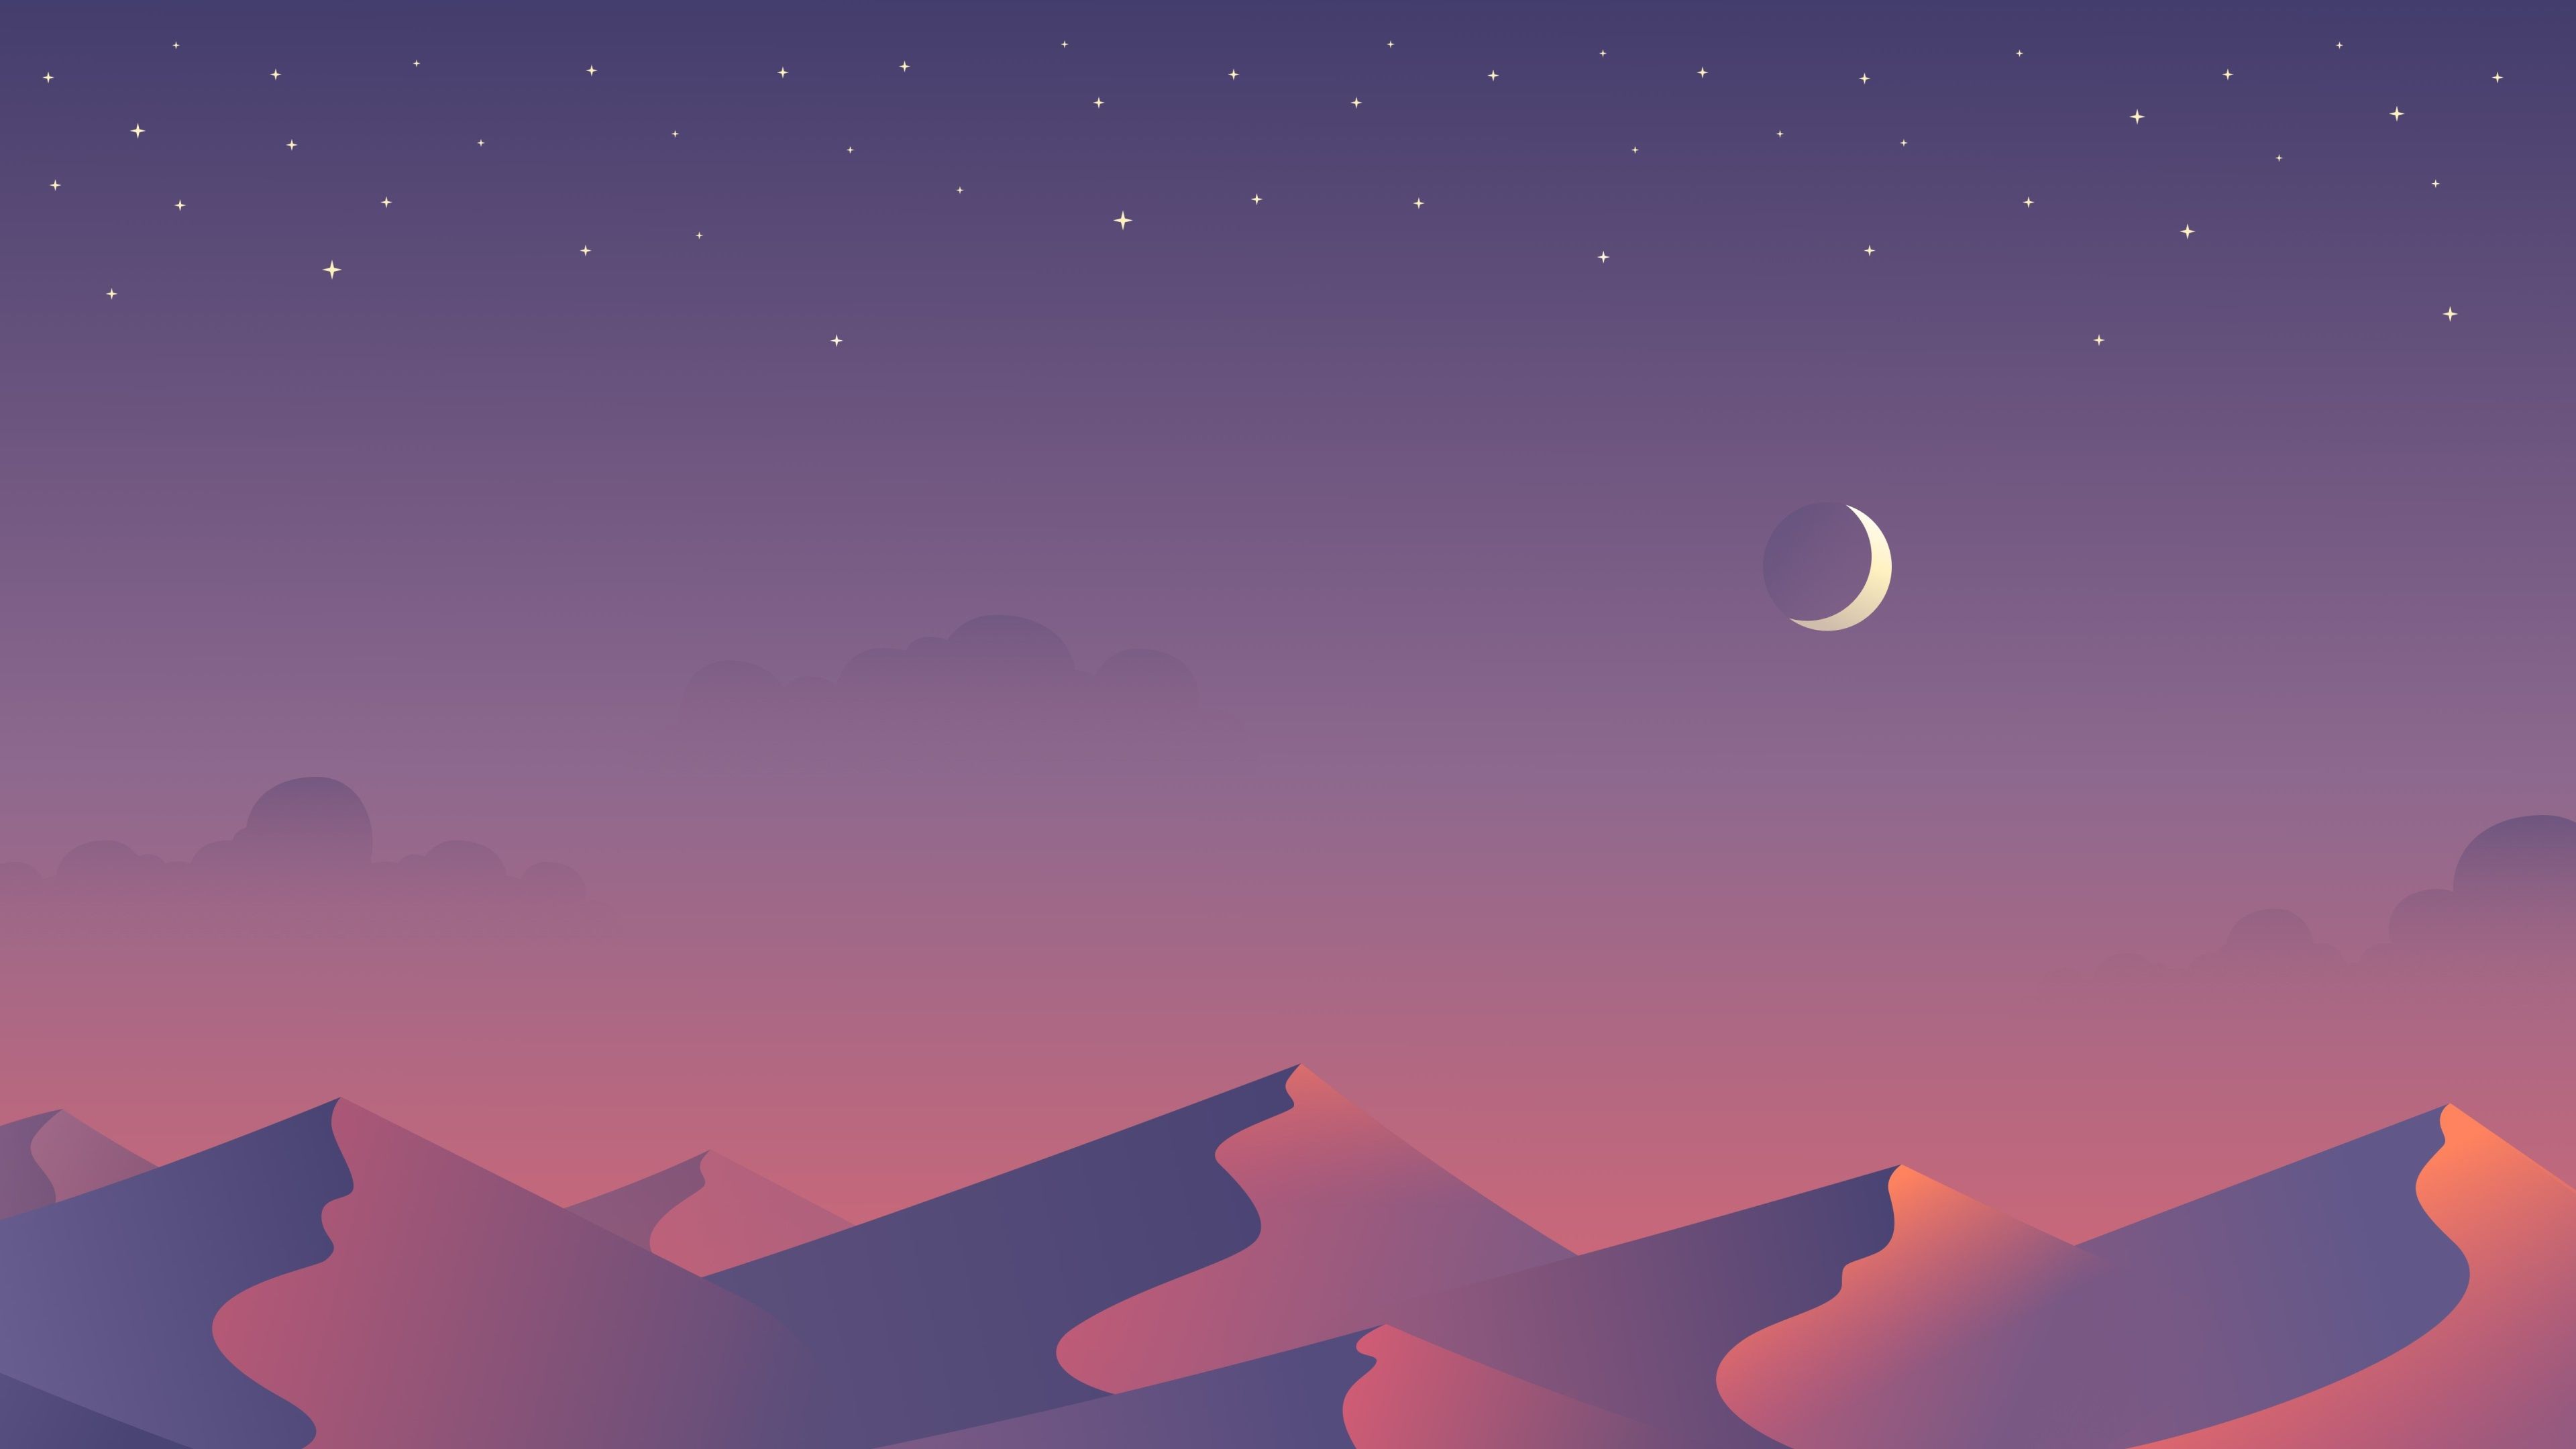 A desert landscape at night with a crescent moon and stars in the sky - Moon, night, desert